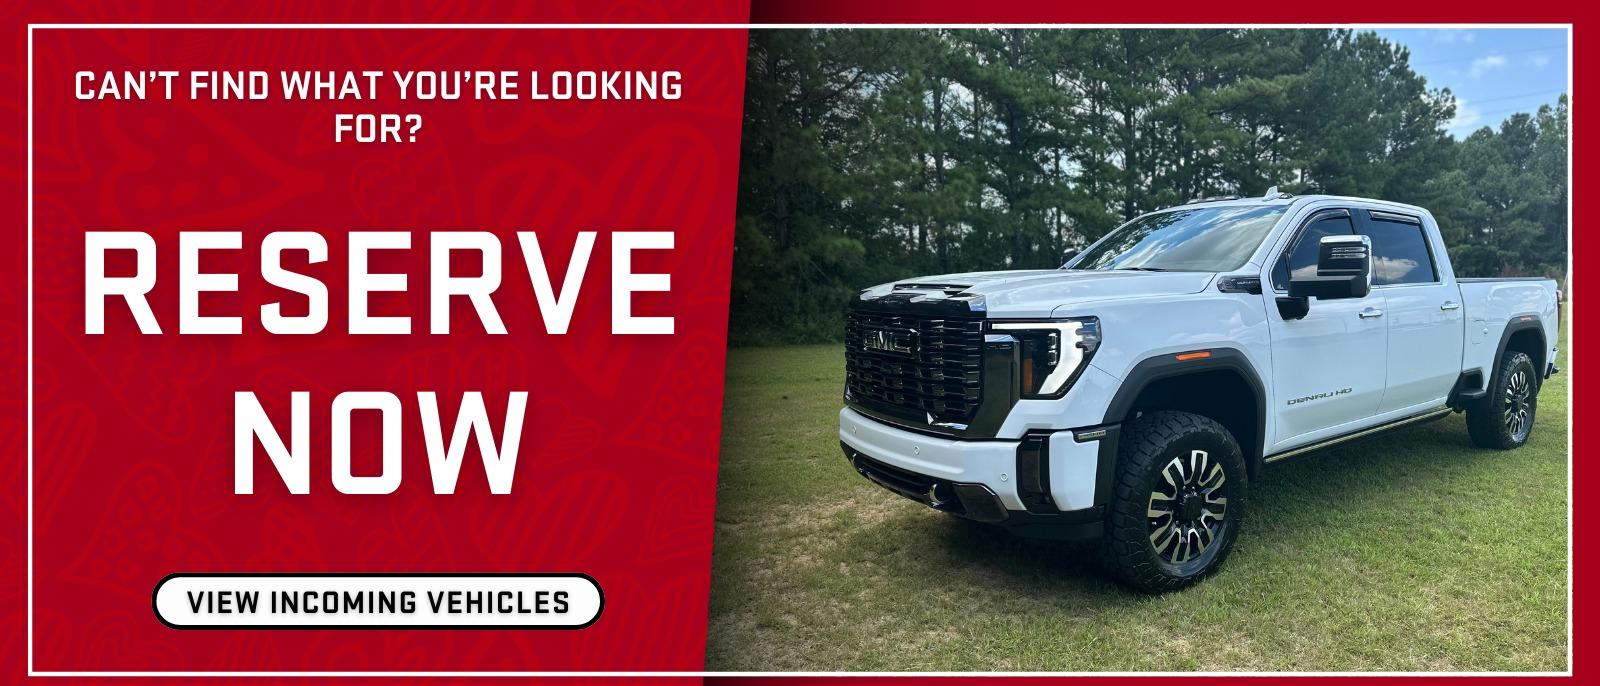 Reserve Your New Buick or GMC Today. Truckloads of new vehicles are arriving weekly.